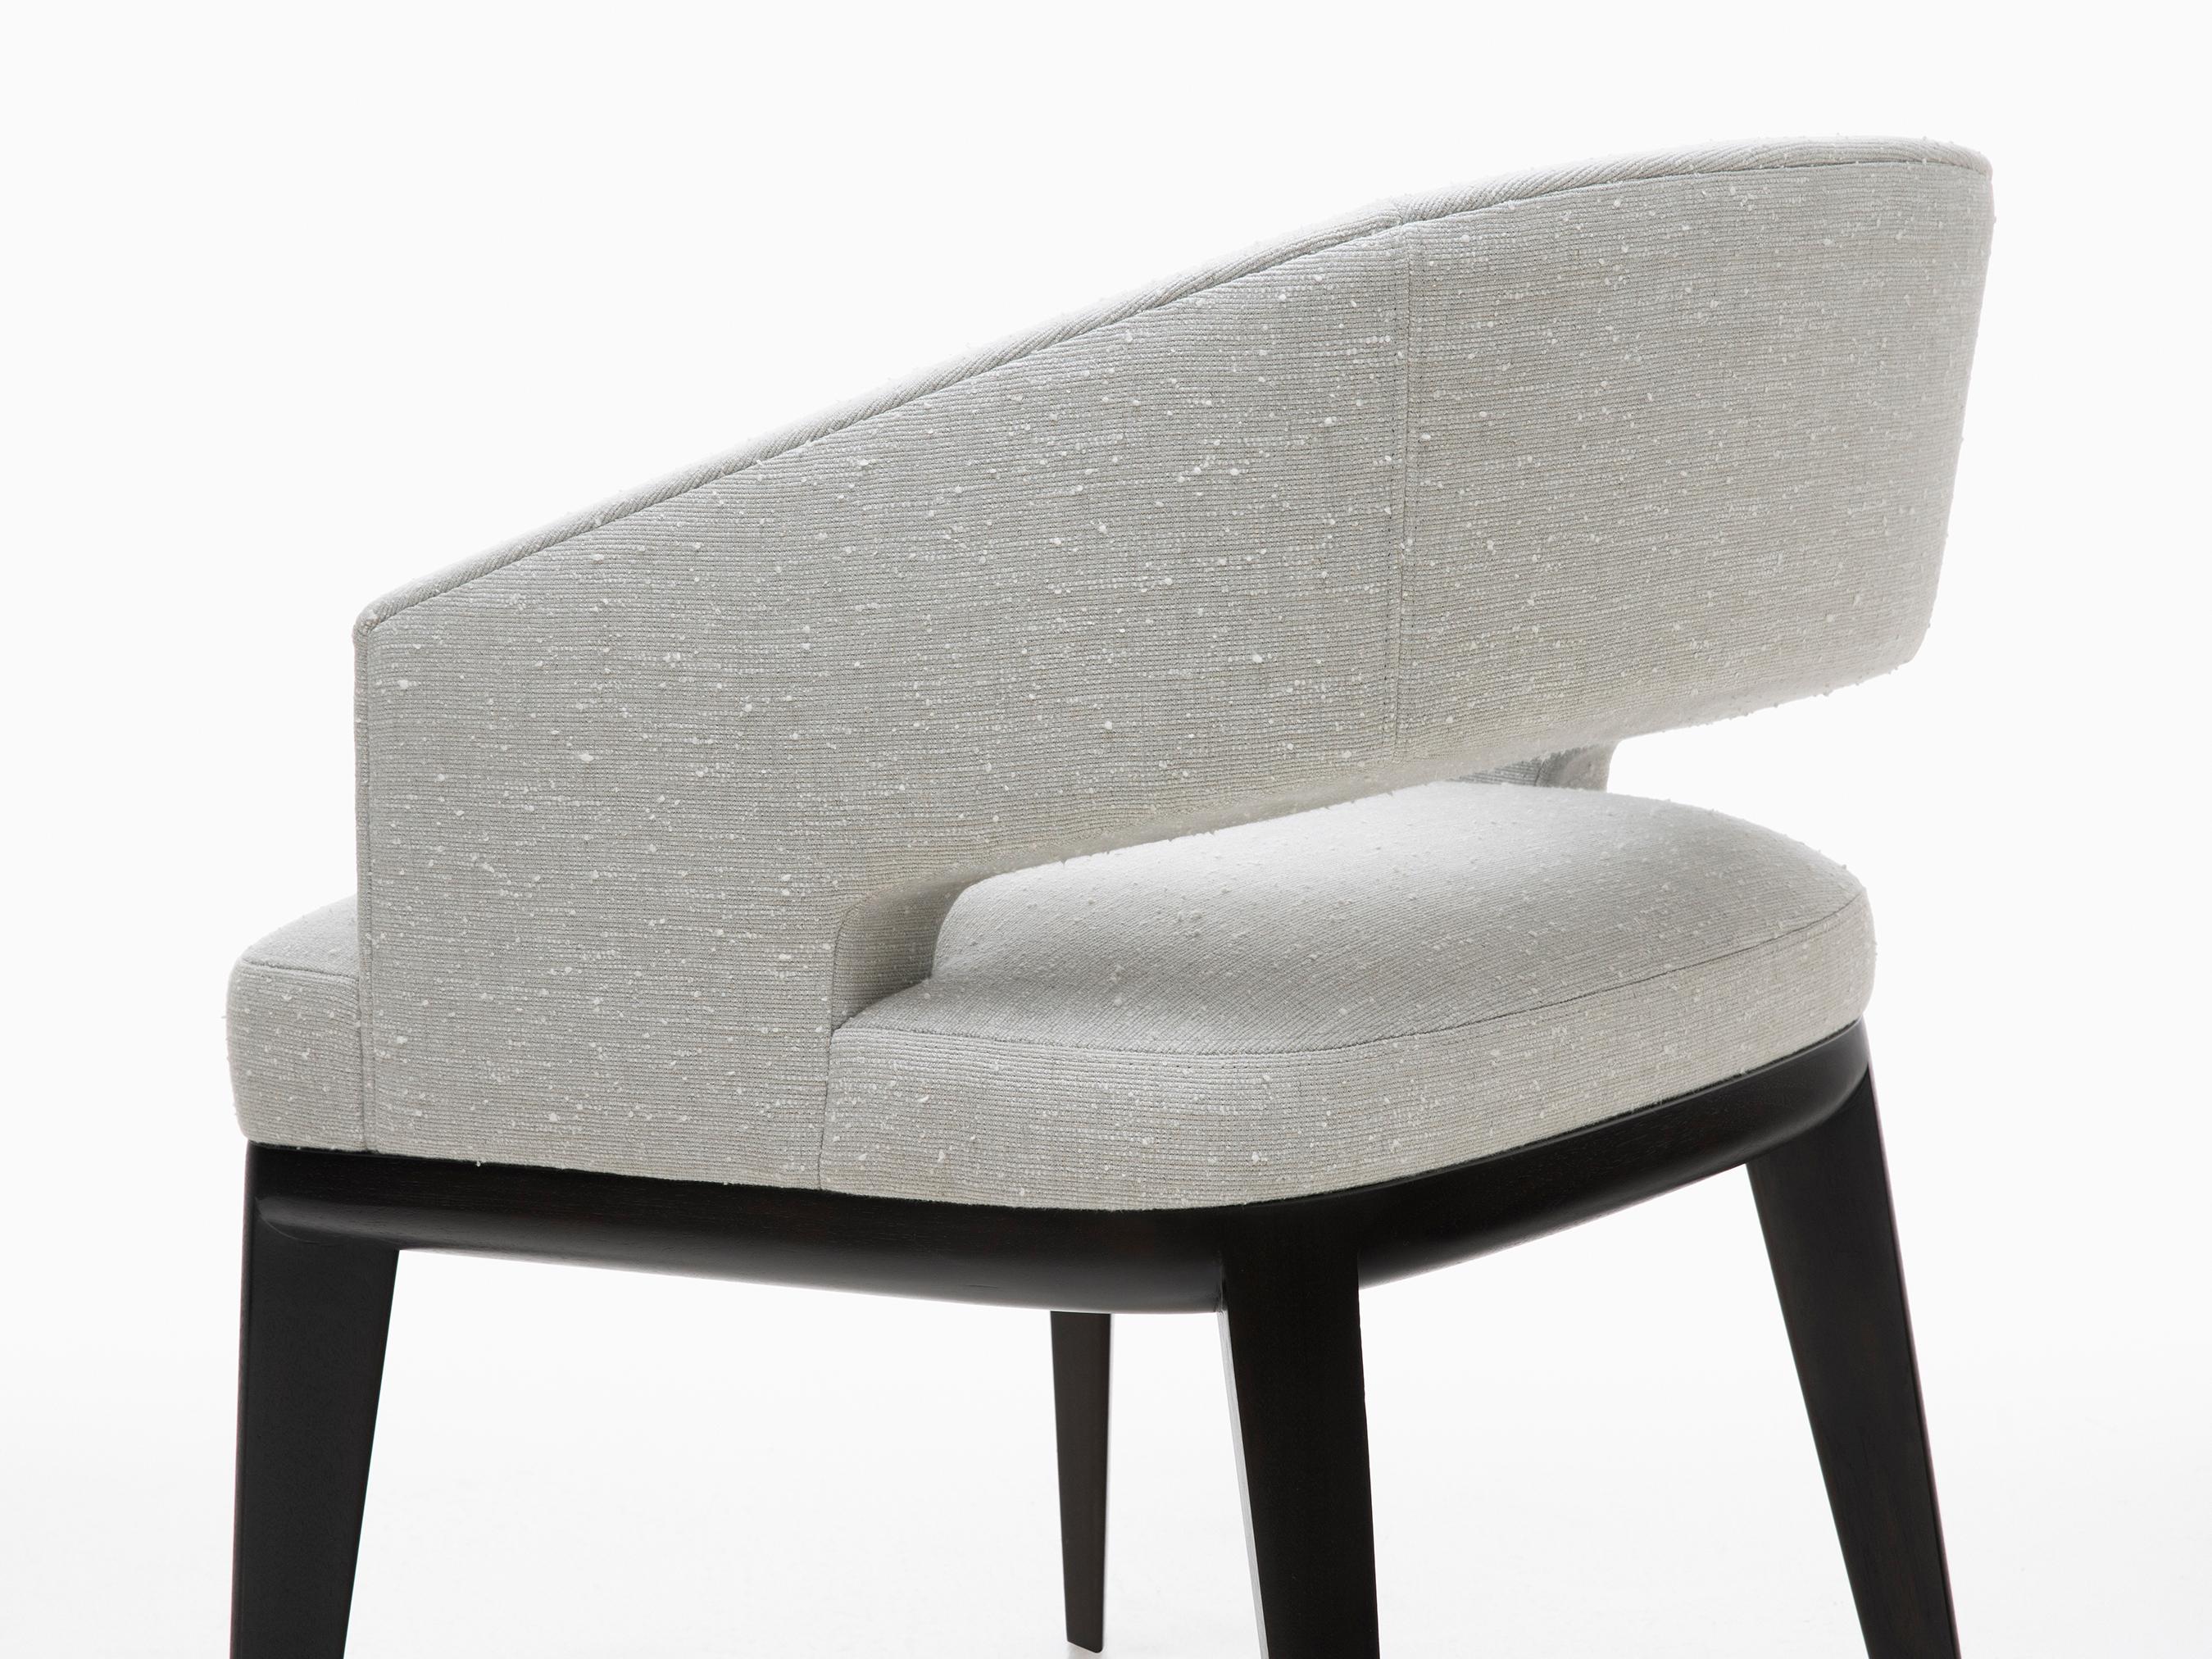 HOLLY HUNT Minerva dining chair in walnut black magic and cloud upholstery. The Minerva’s alluring curves are a harmonious blend of geometric and organic forms. Refined contours of this latest edition in the Minerva series accentuate the details